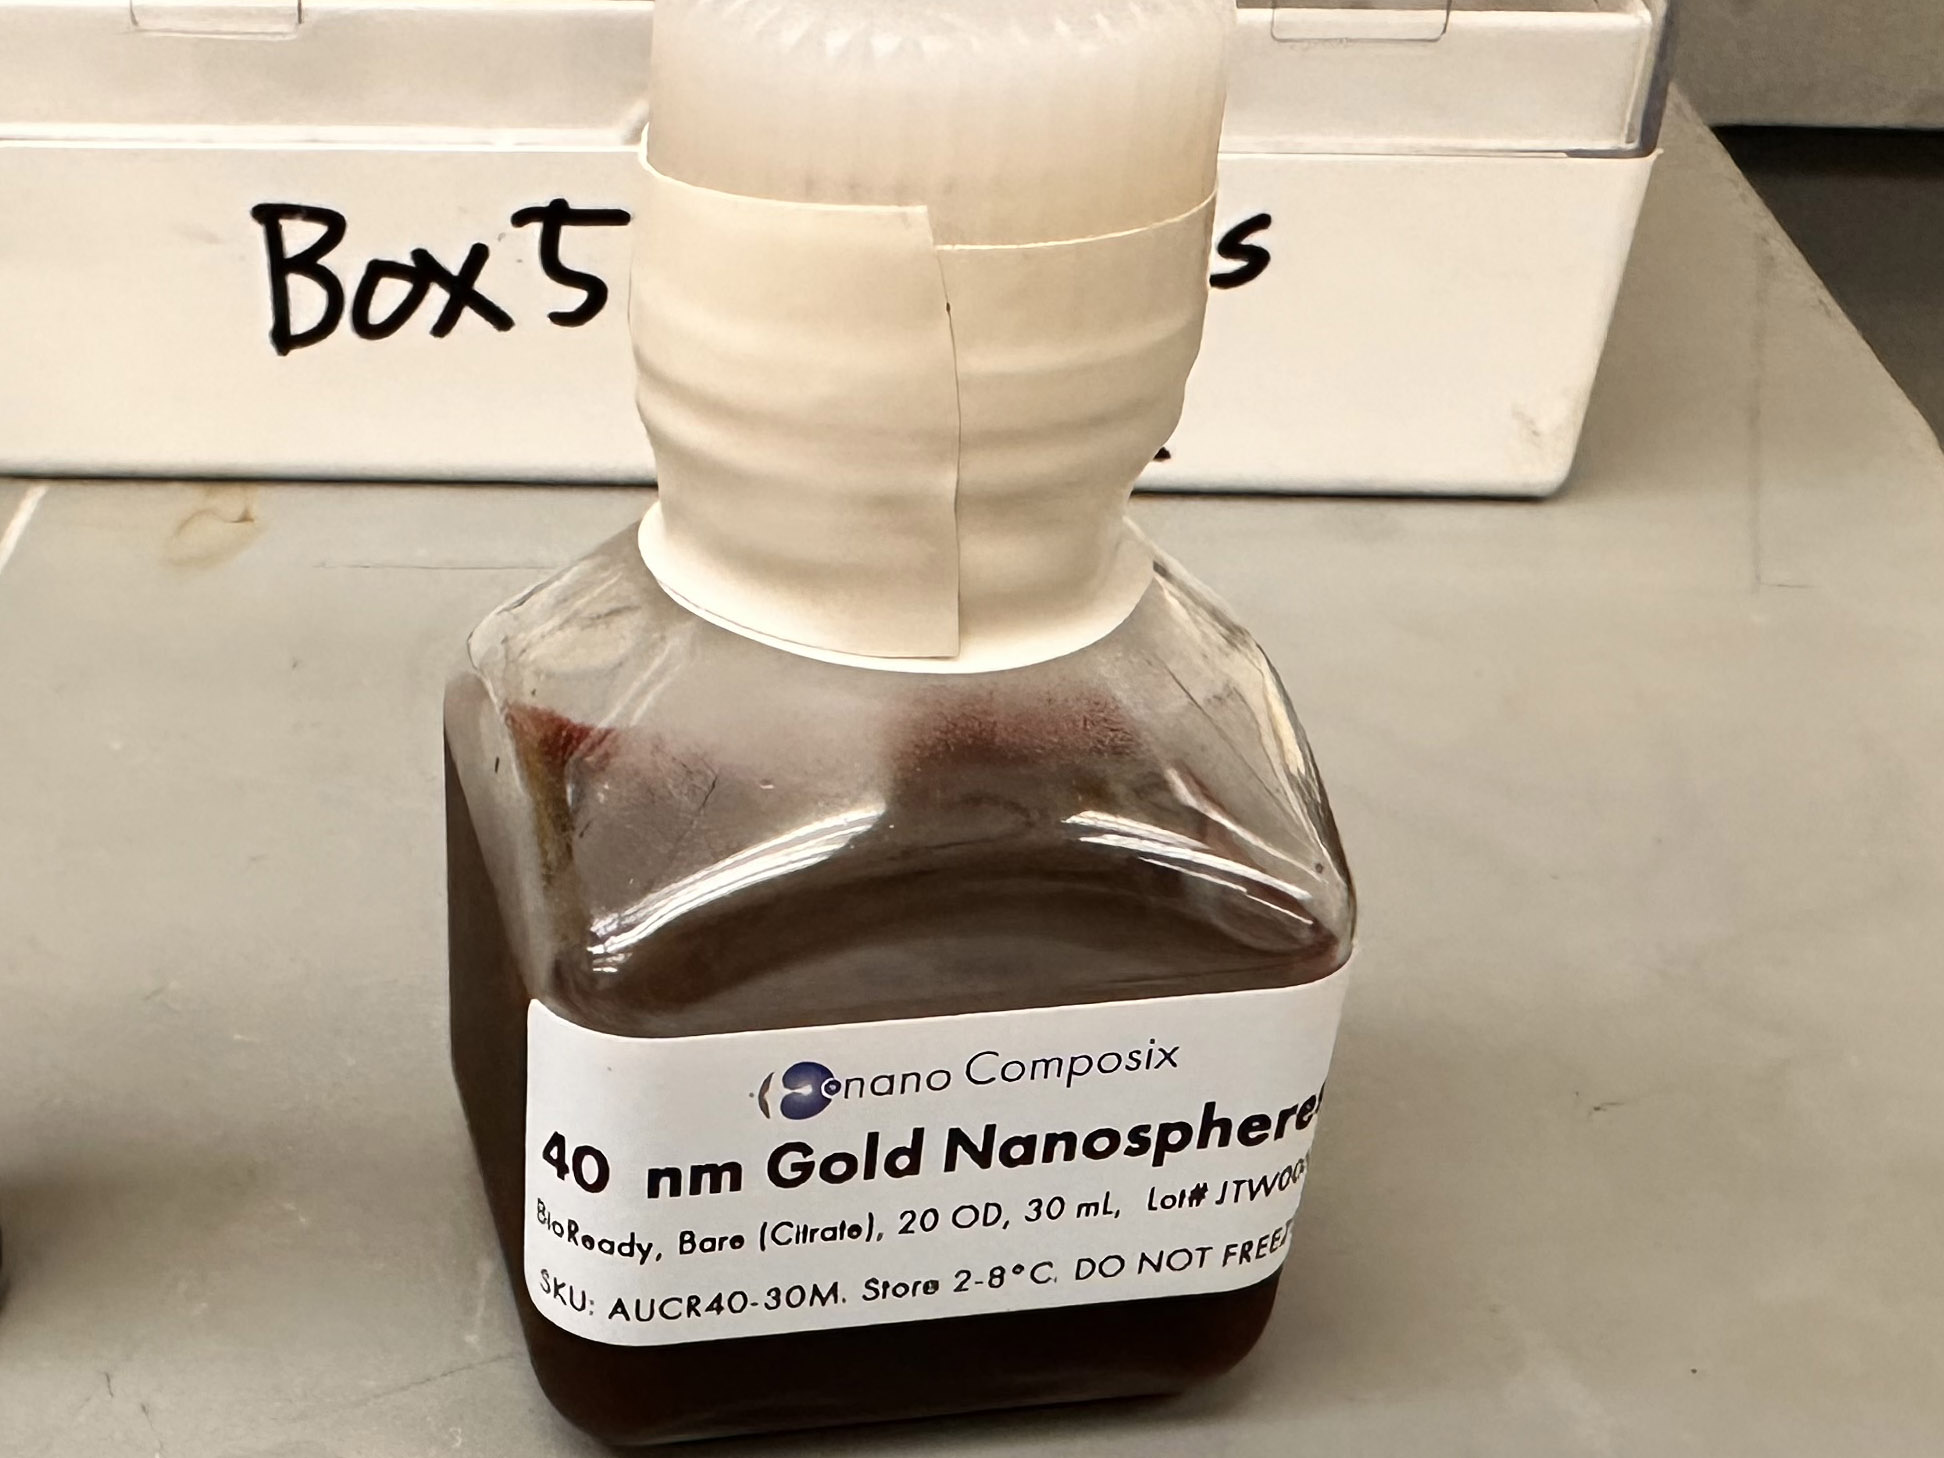 Gold nanoparticles used in the lateral flow assay test experiments.